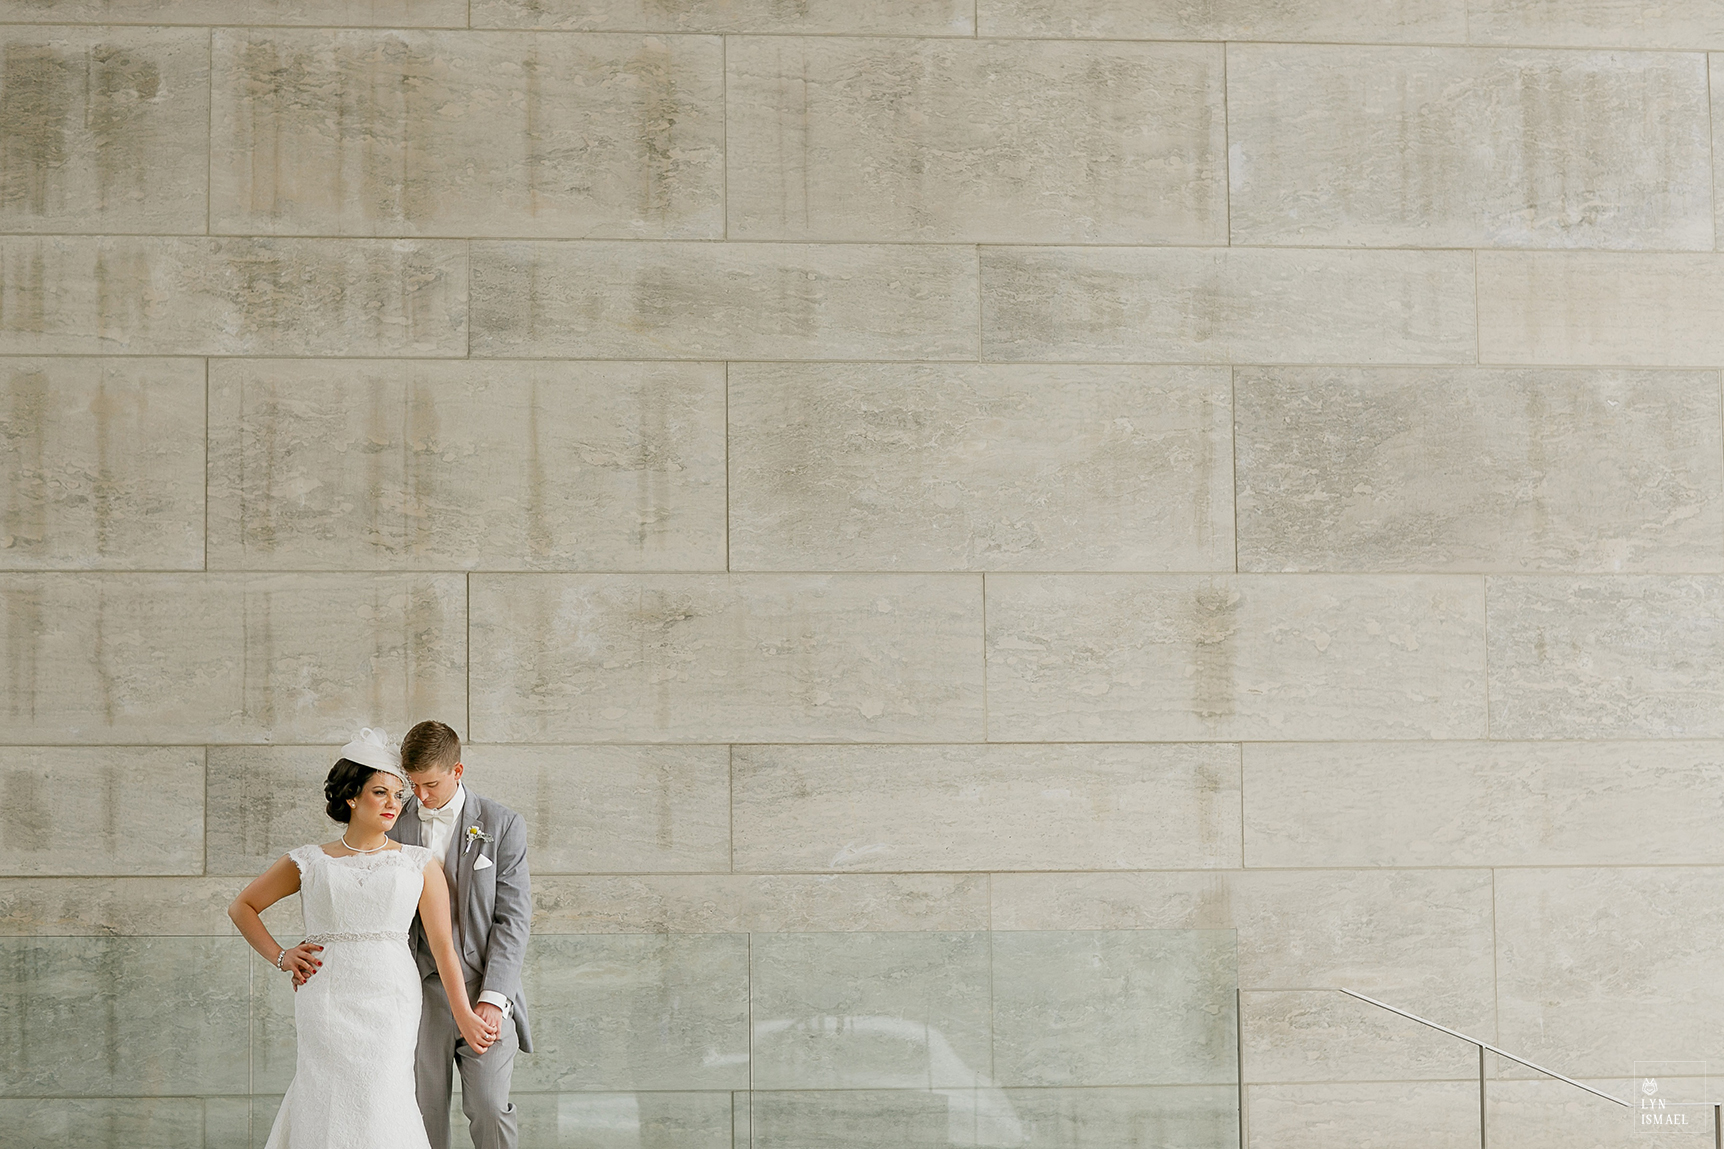 A modern portrait of the bride and groom in Uptown Waterloo